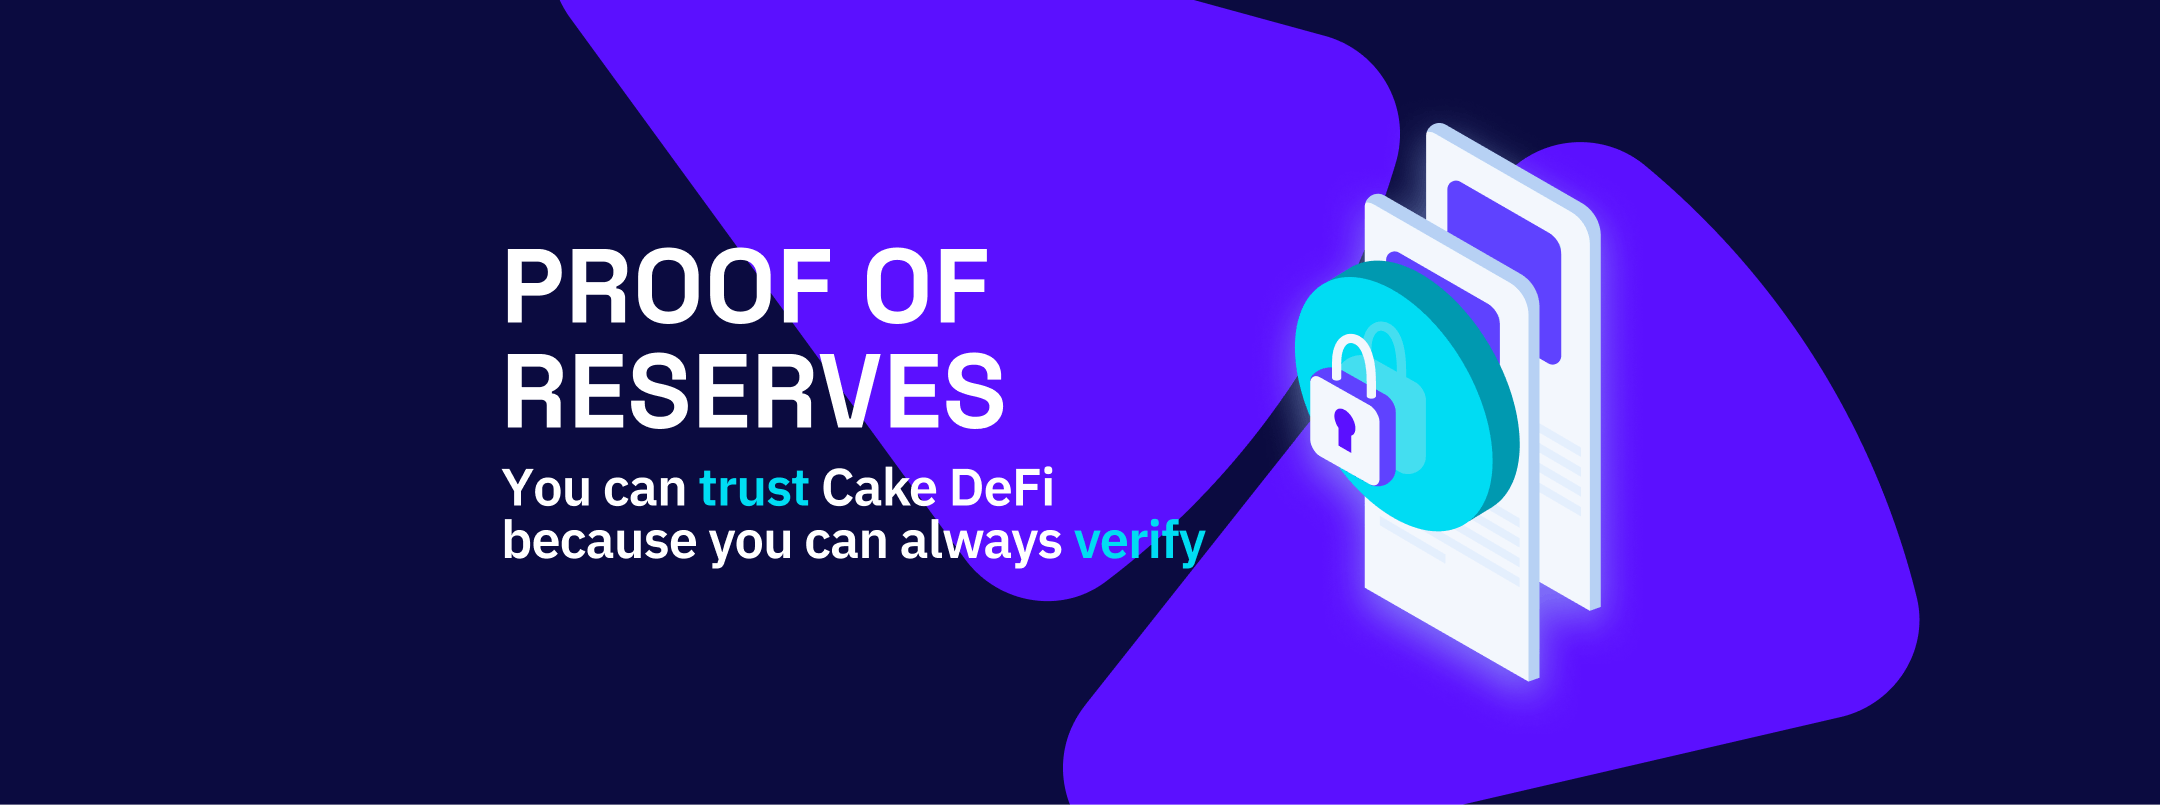 Proof of Reserves: You can trust Cake DeFi because you can always verify